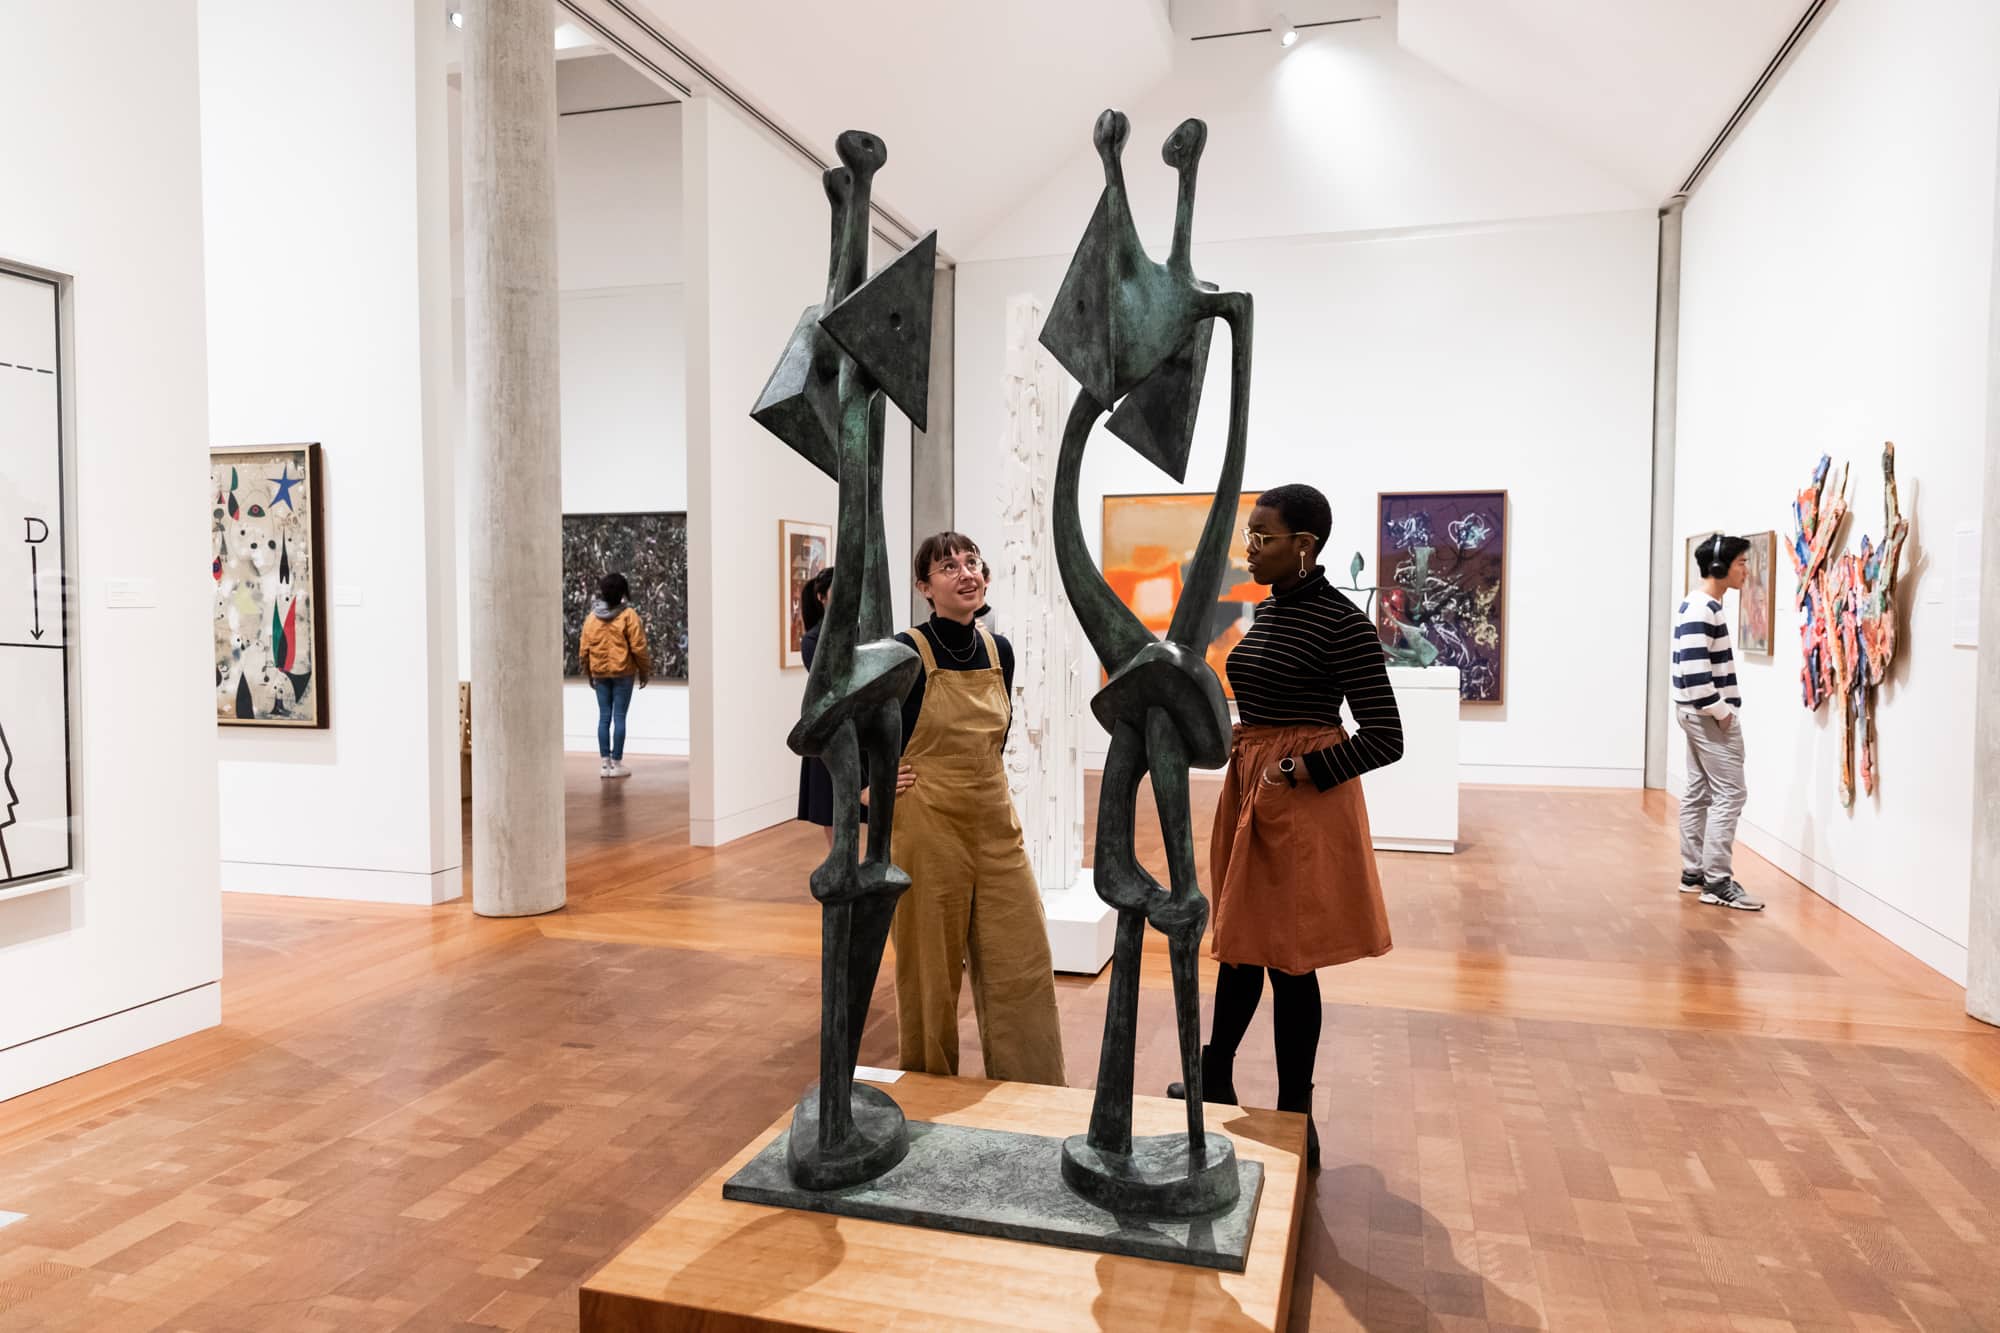 People in an art gallery are looking at a black statue and conversing with one another.